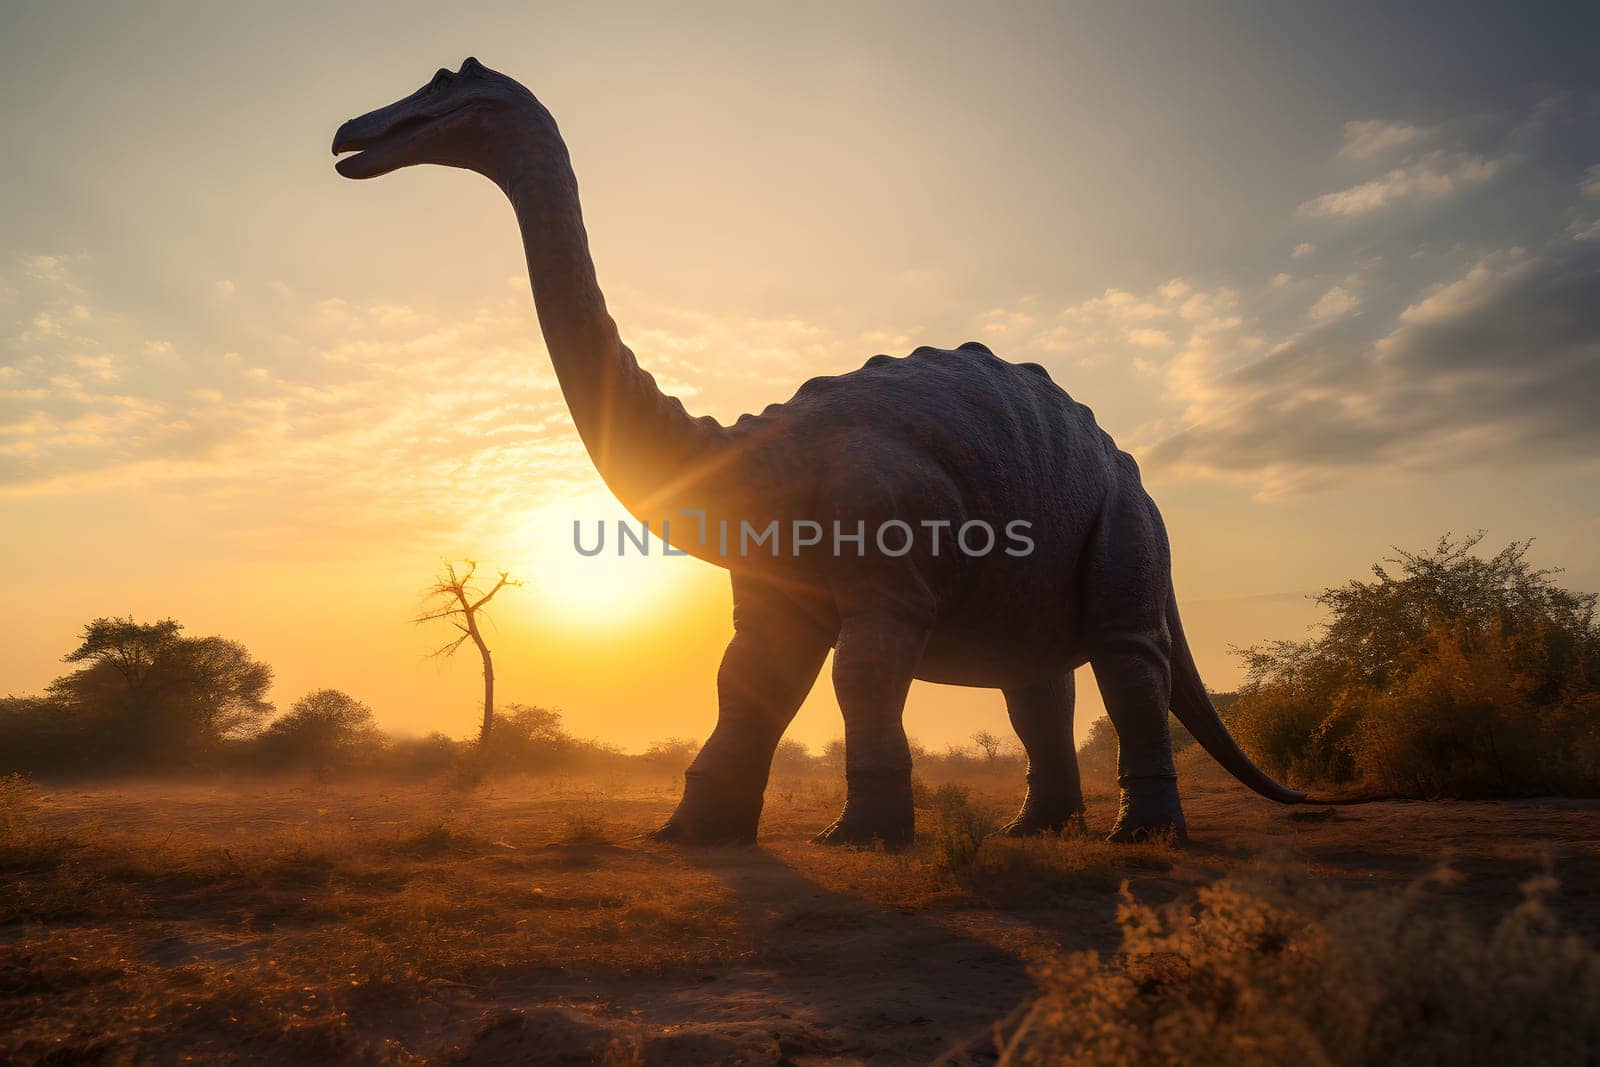 Brontosaurus wide angle view full body portrait at summer day light. Neural network generated in May 2023. Not based on any actual scene or pattern.